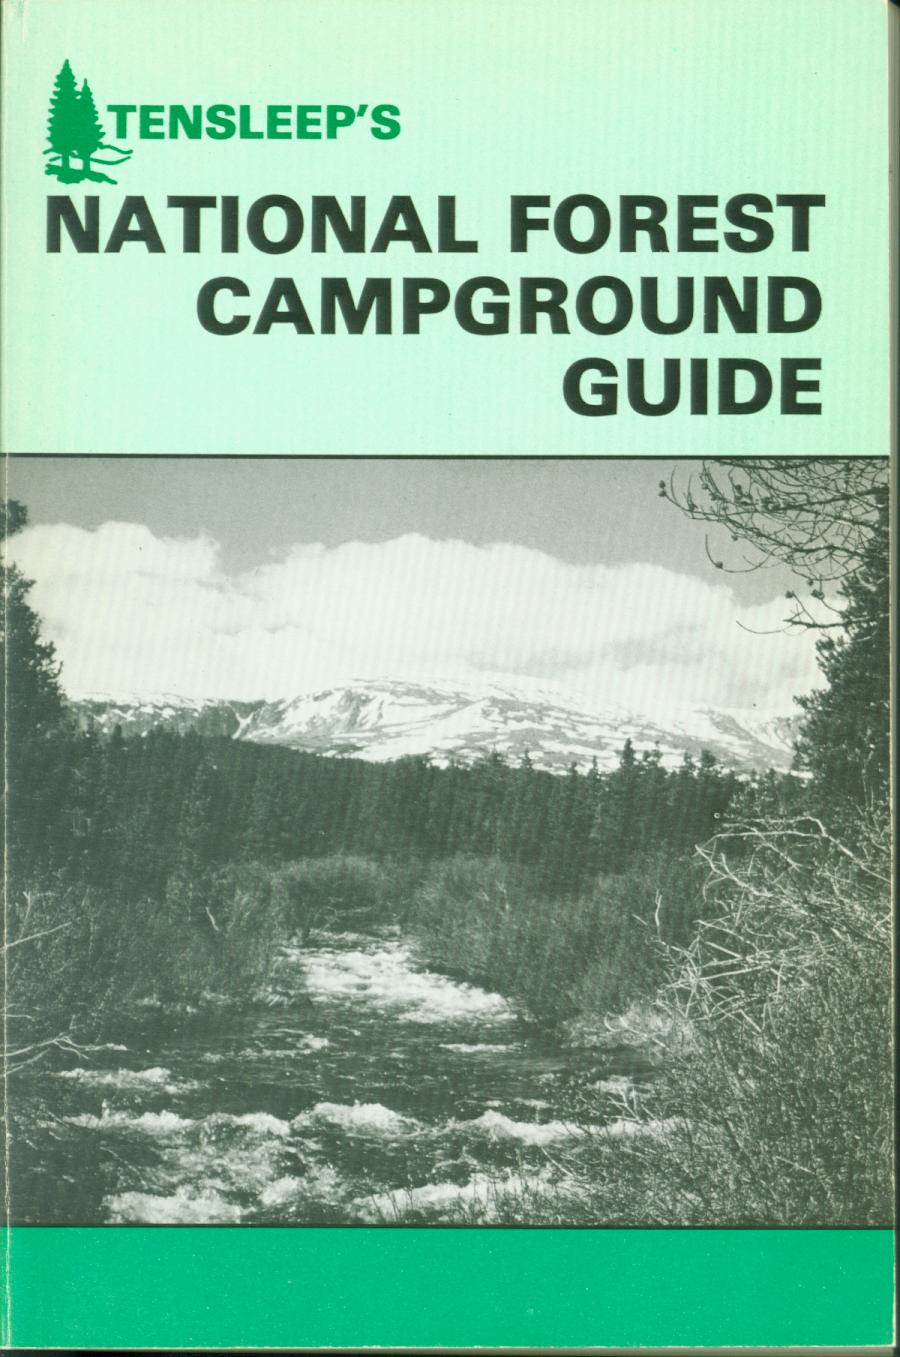 TENSLEEP'S NATIONAL FOREST CAMPGROUND GUIDE: a recreational guide to America's national forests. 